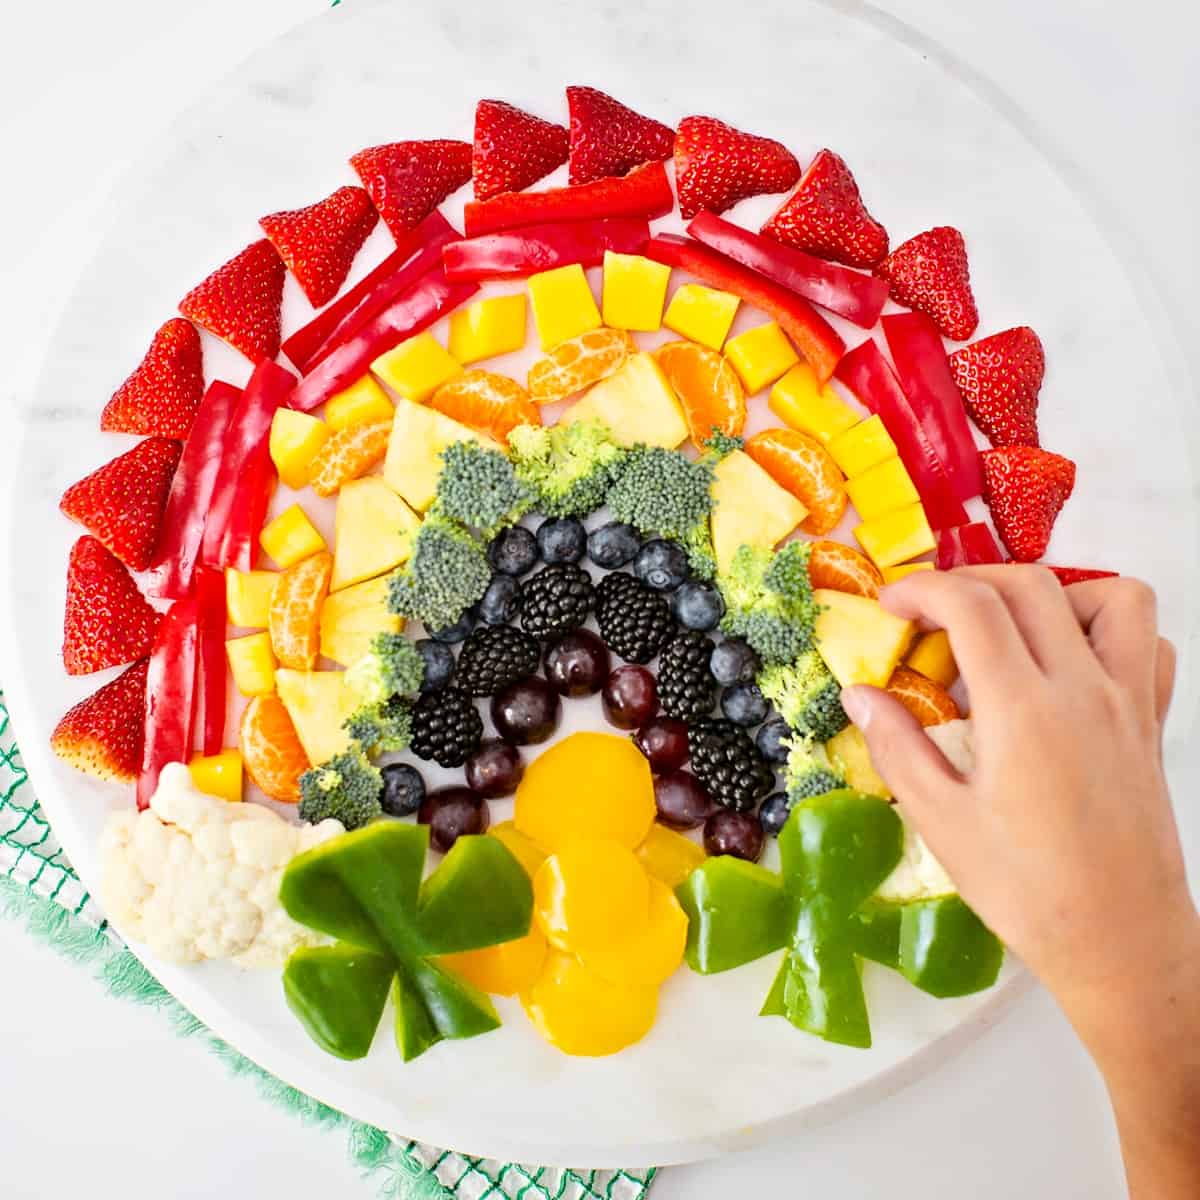 St. Patrick’s Day Fruit and Veggie Tray